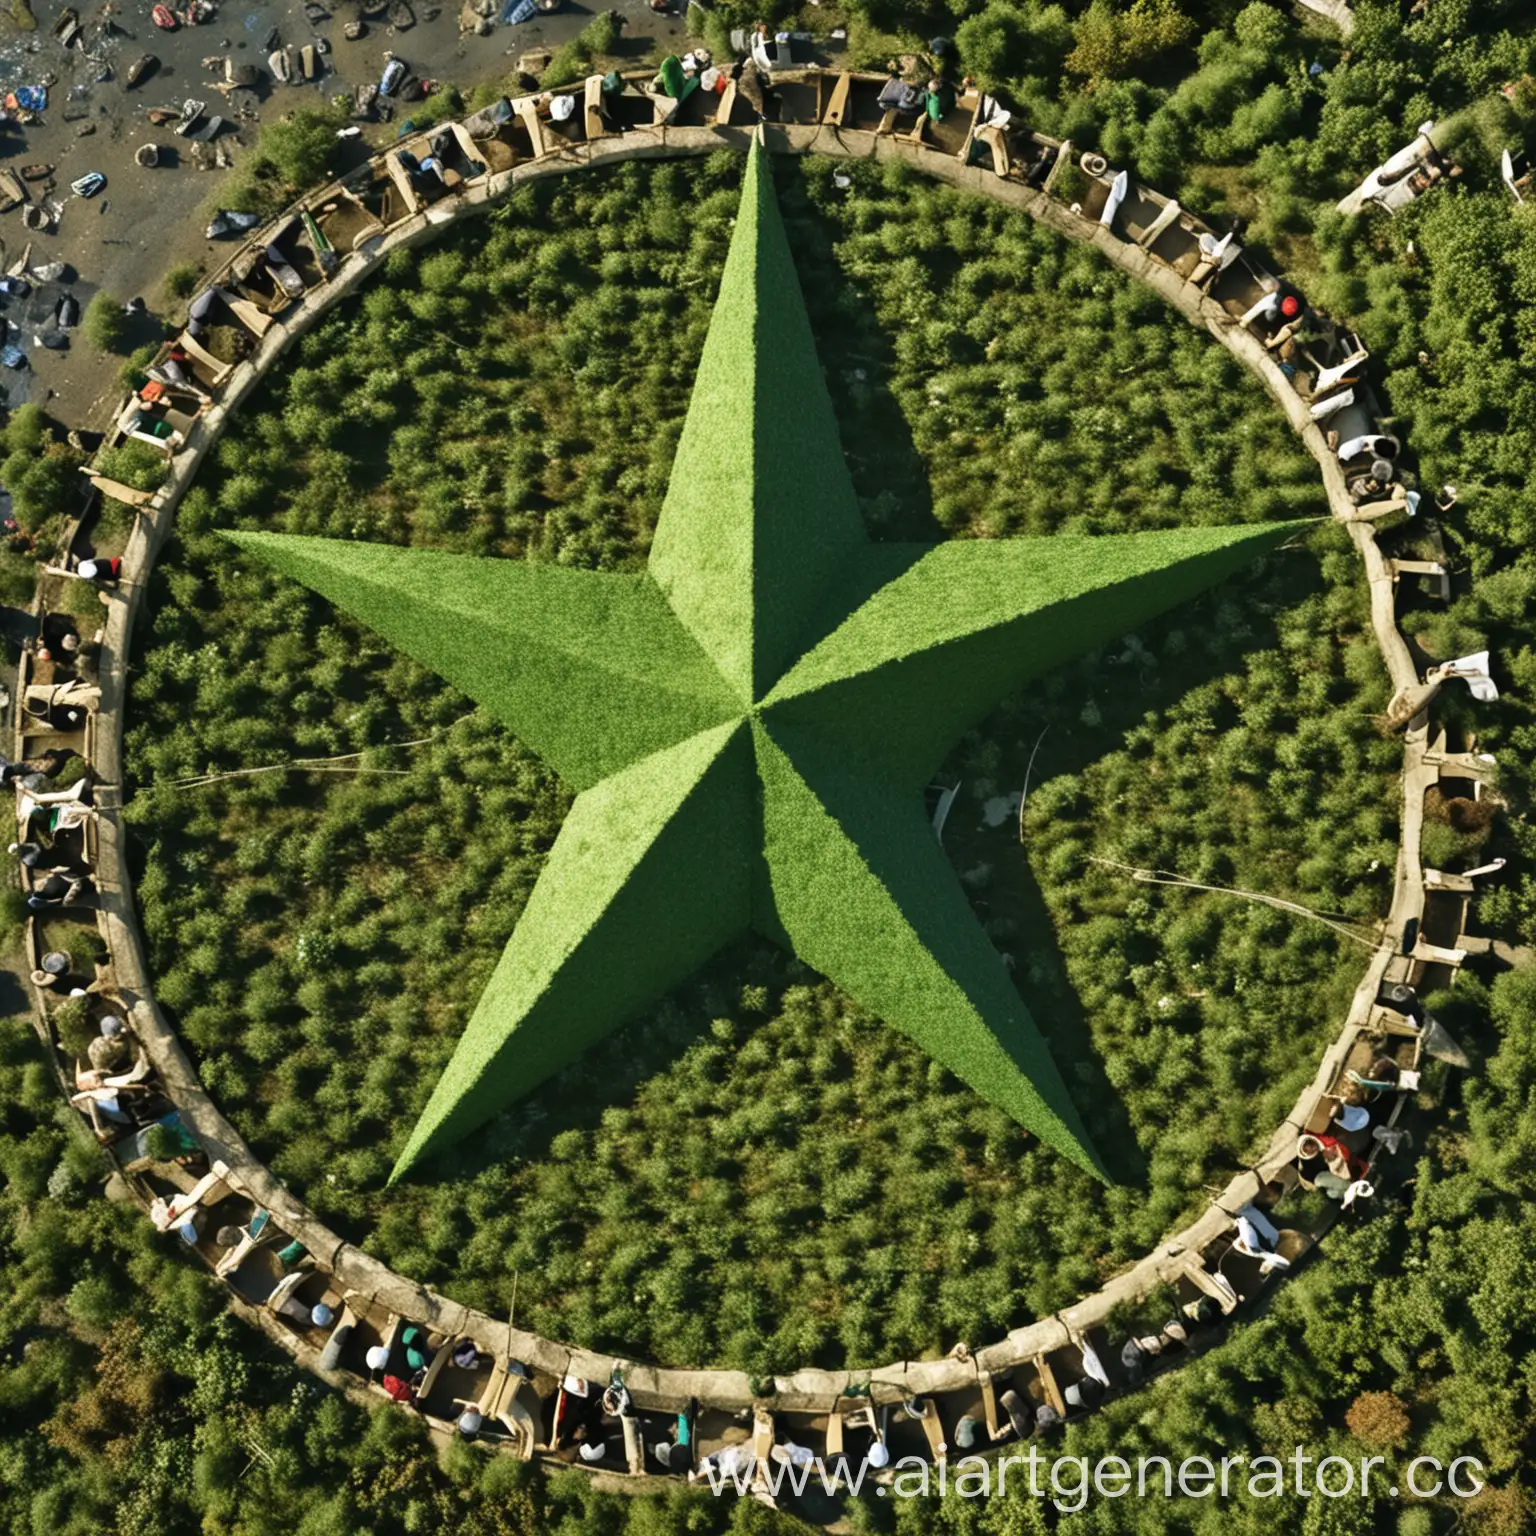 Utopian-Ecopolis-Green-Star-Sustainable-Living-and-Collective-Harmony